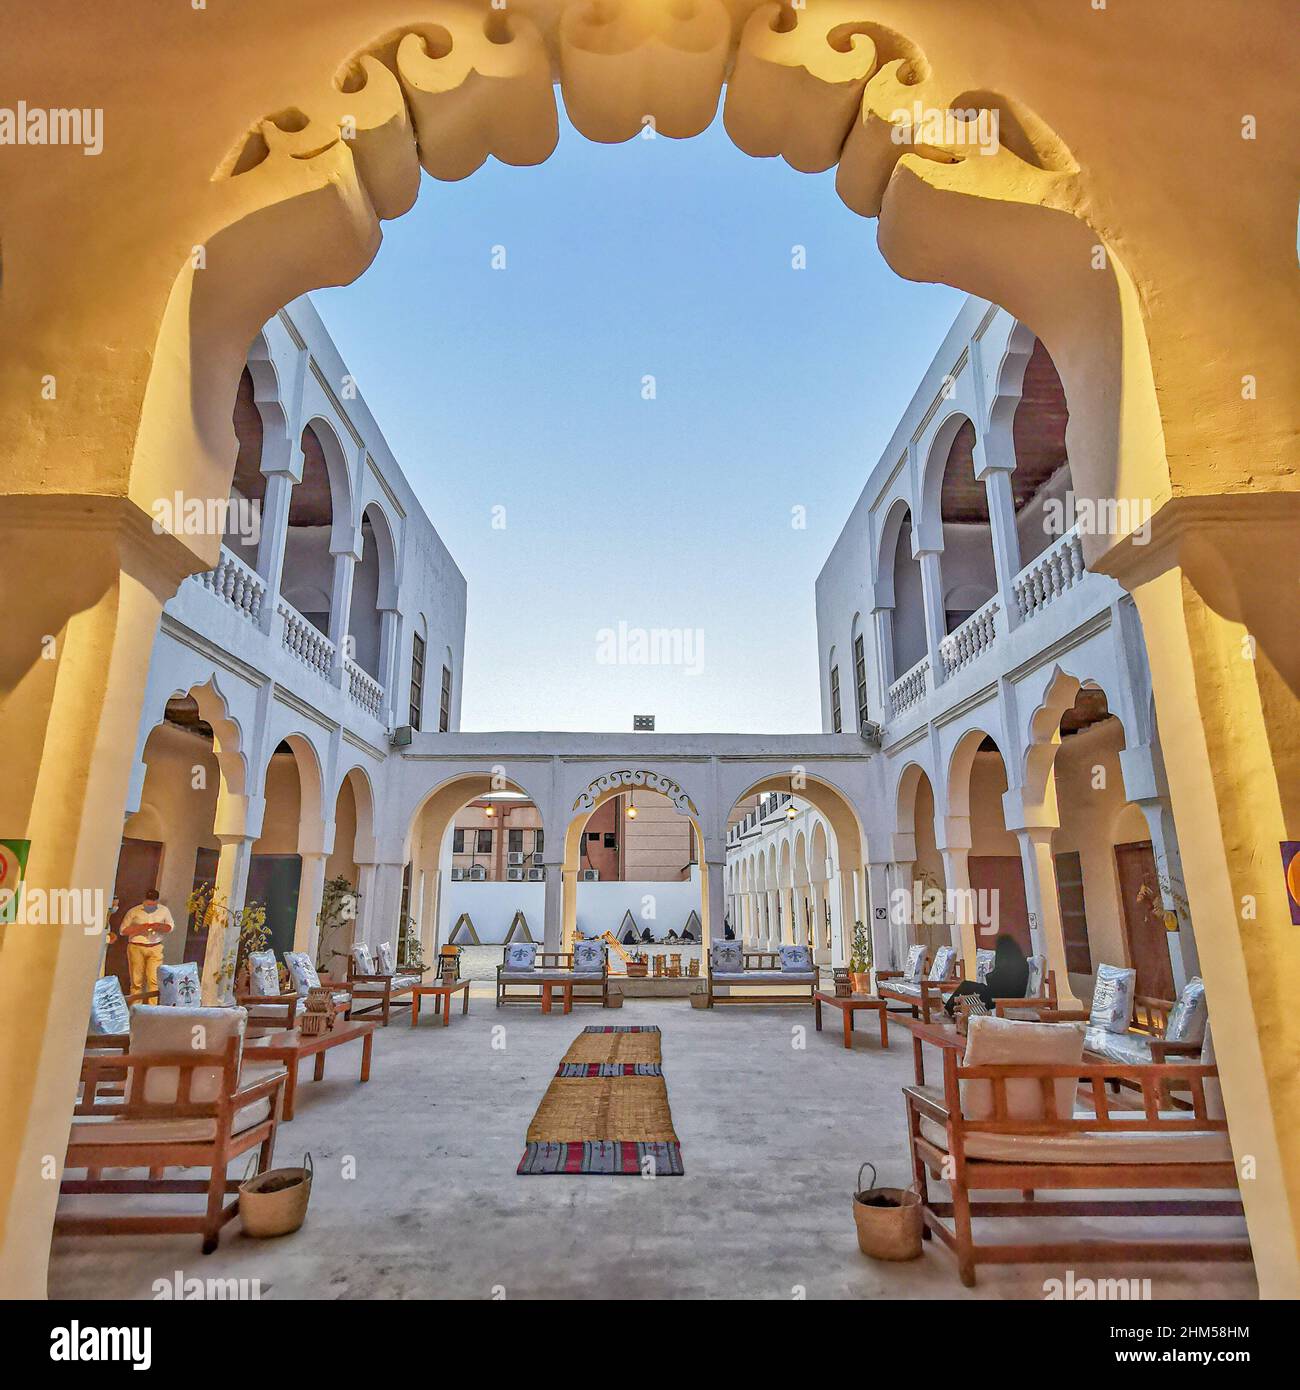 HOFUF, SAUDI ARABIA - February 2nd, 2021: The Princess School in Hofuf, Al-Ahsa  is the oldest public school in Saudi Arabia and has been linked to th Stock Photo